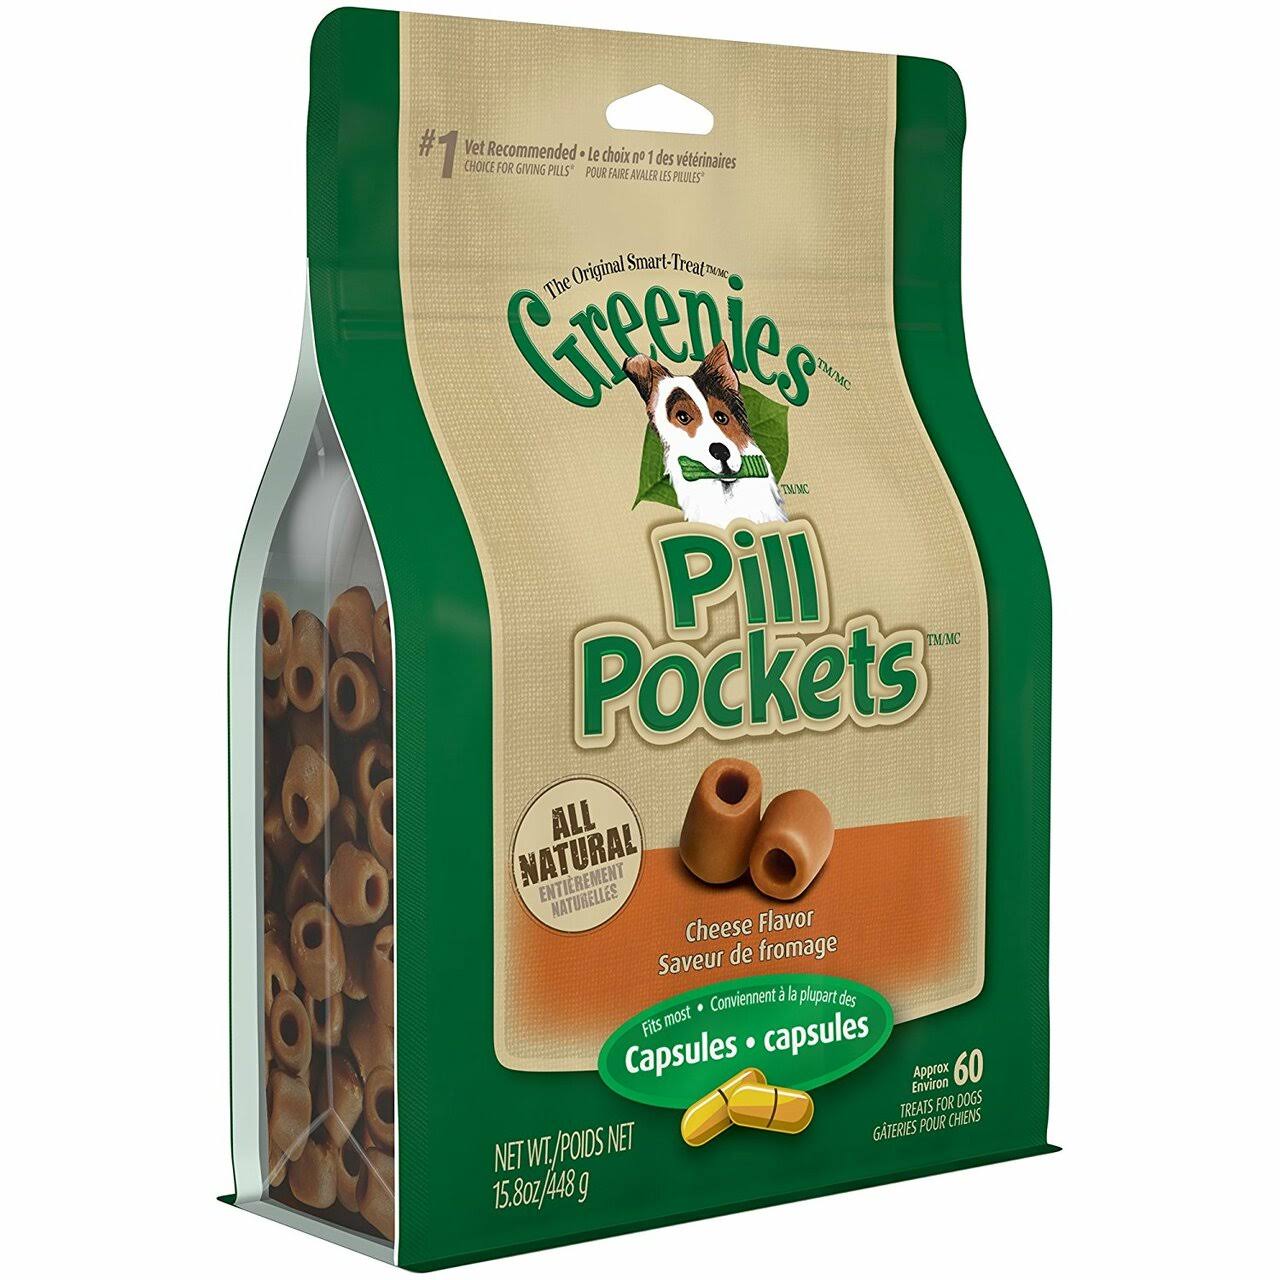 Greenies Pill Pockets For Capsules, Cheese Flavor For Dogs